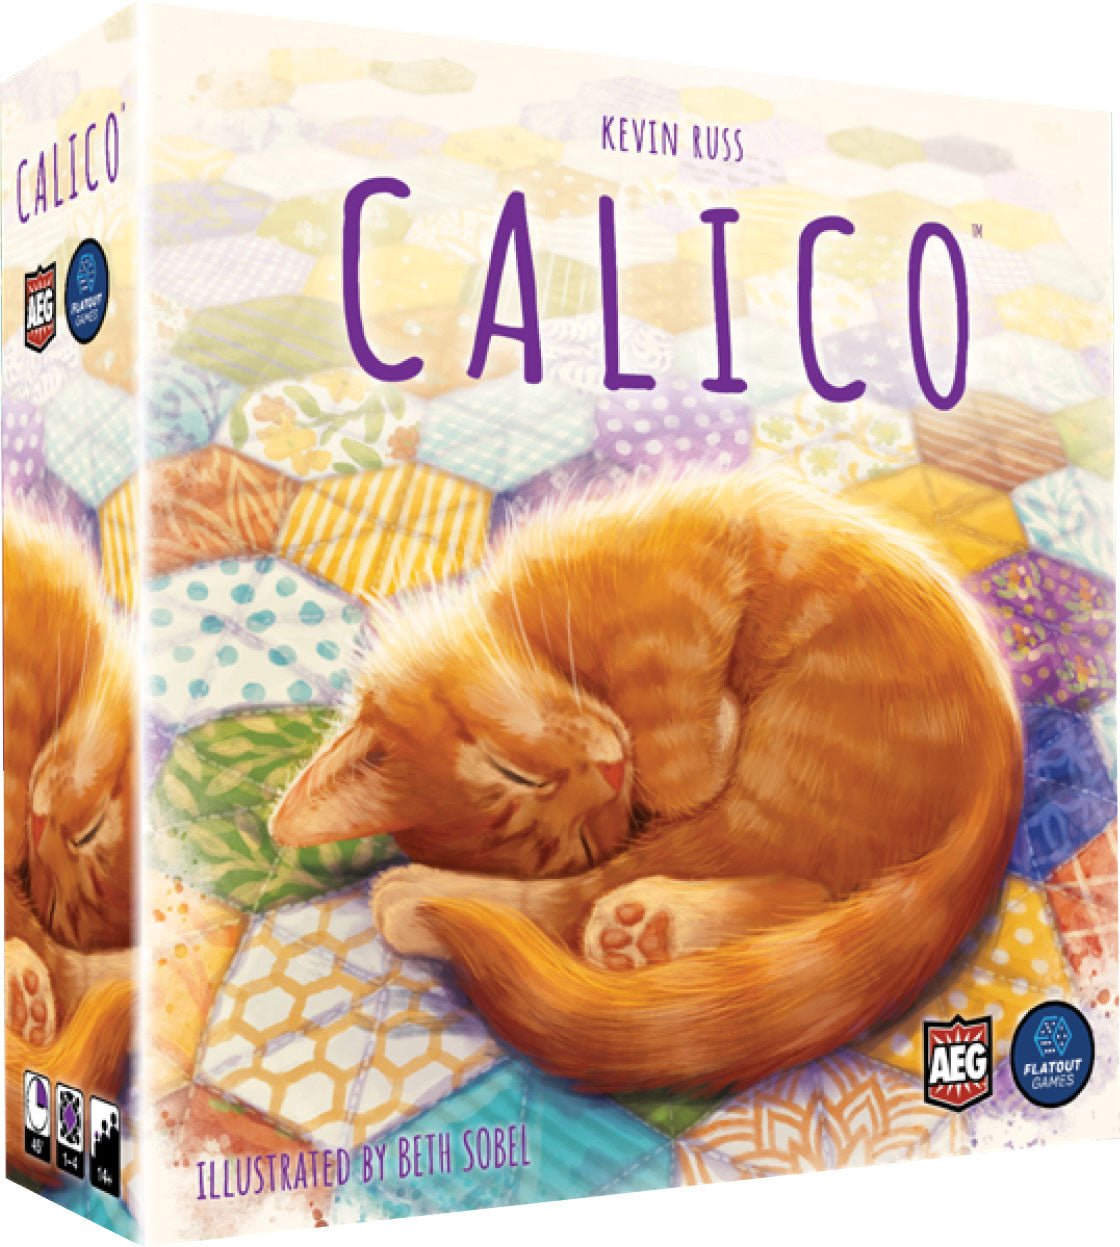 Calico - The Compleat Strategist